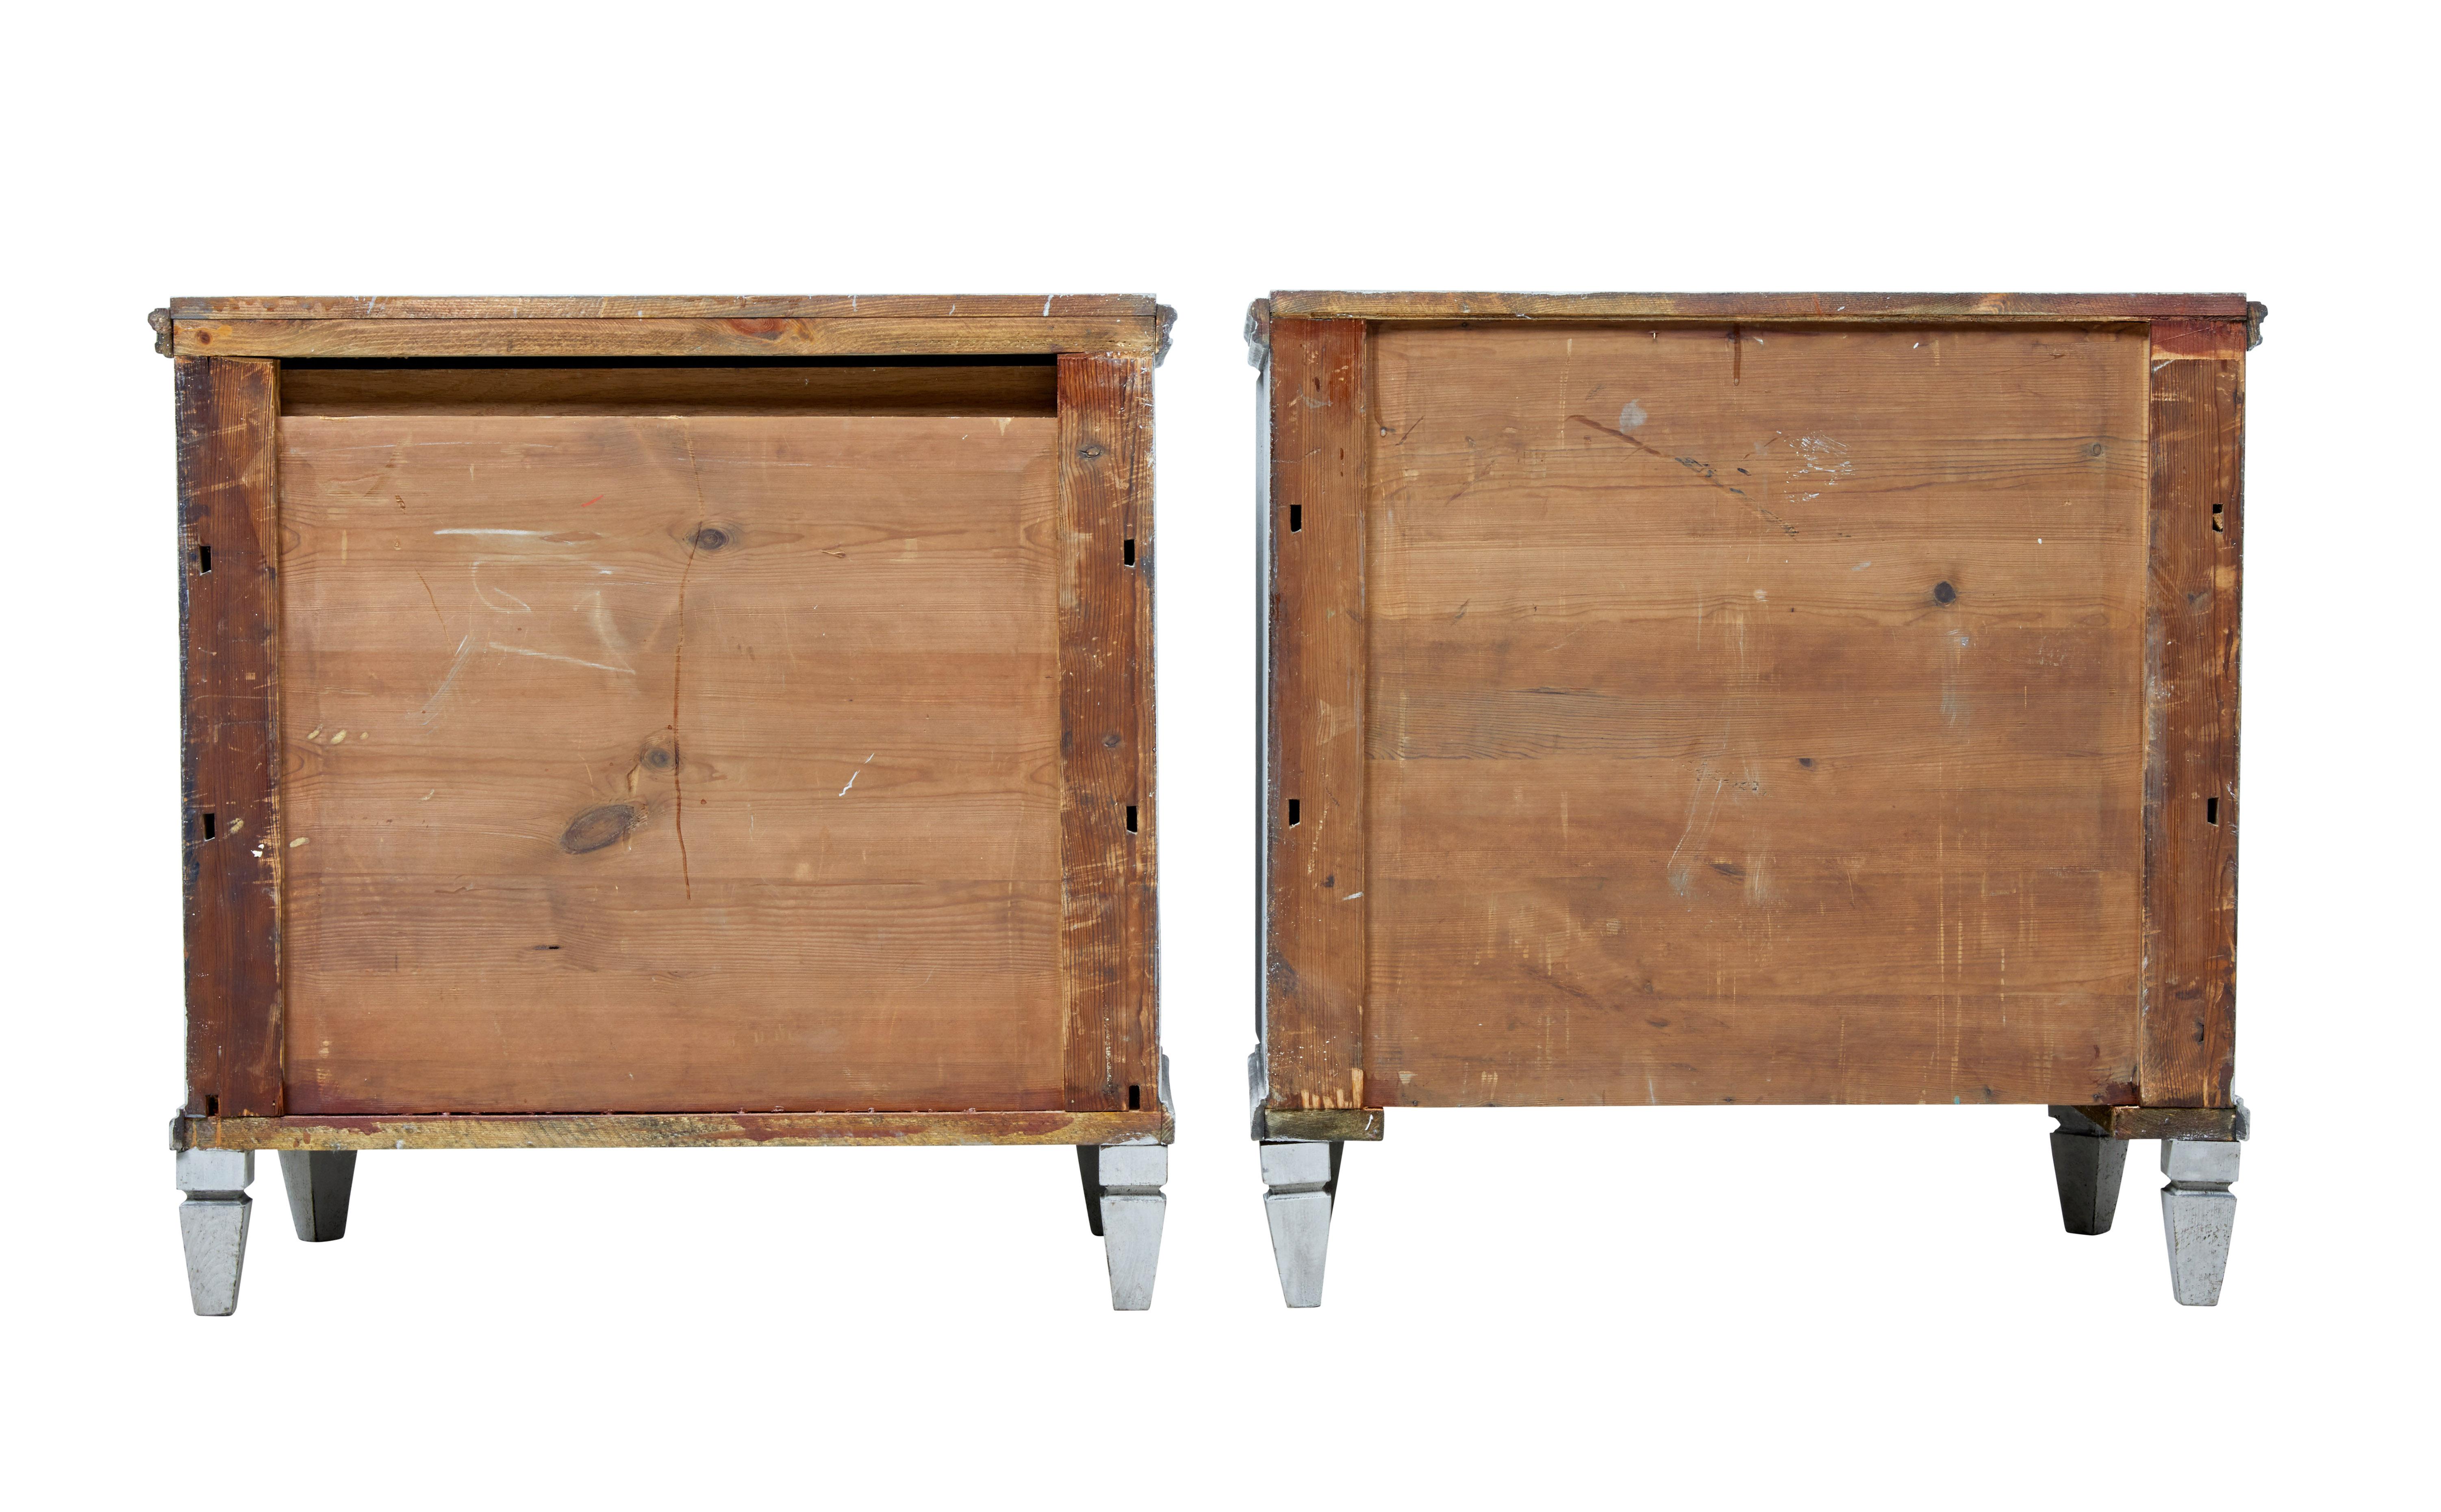 Hand-Painted Pair of 19th Century Painted Swedish Commodes